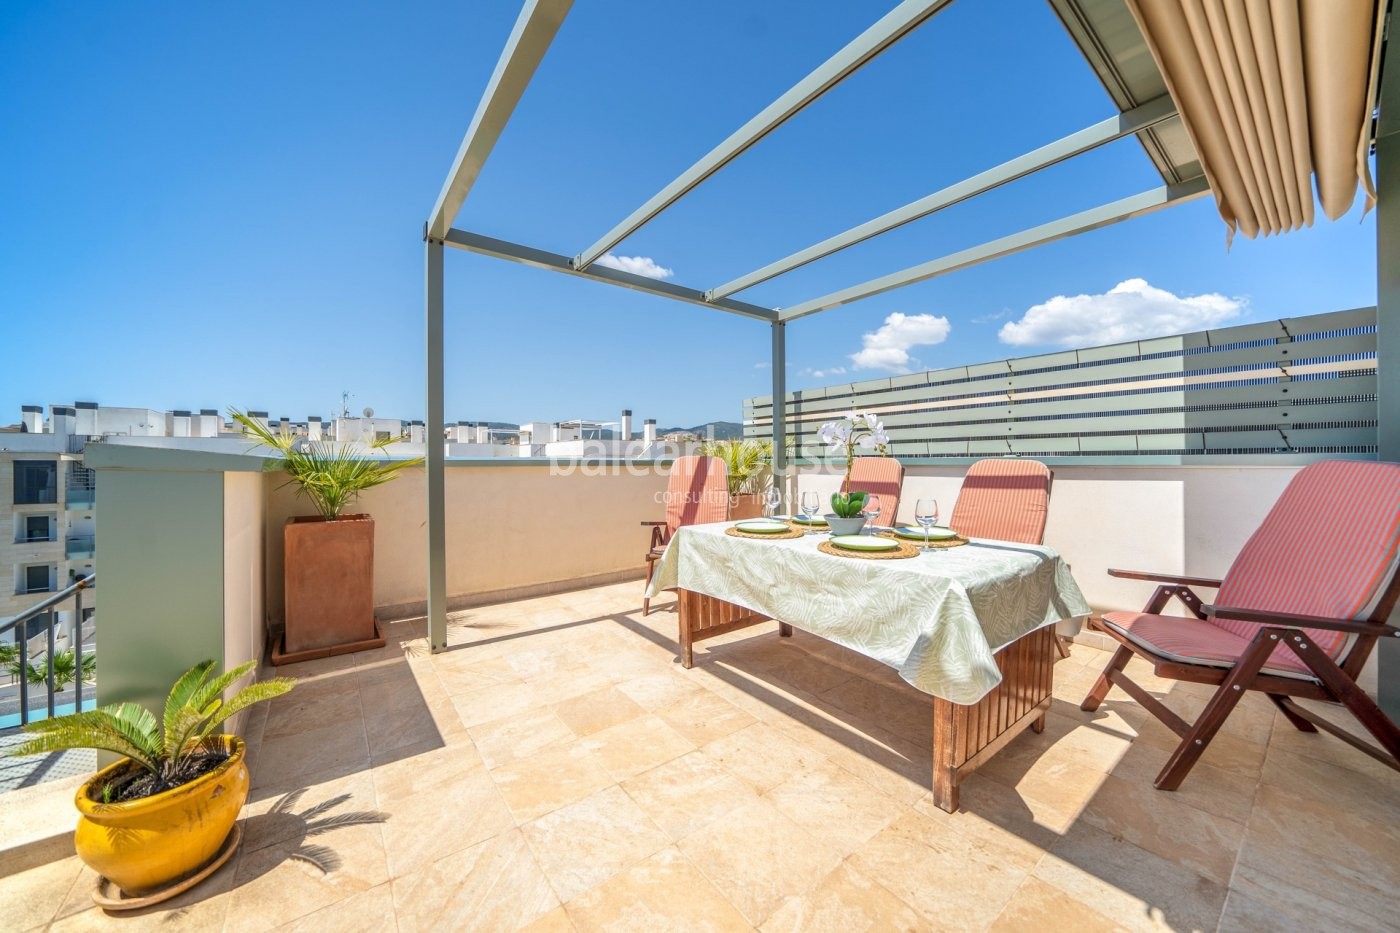 Helles Penthouse mit großer privater Sonnenterrasse in unverbaubarer Lage in Palma